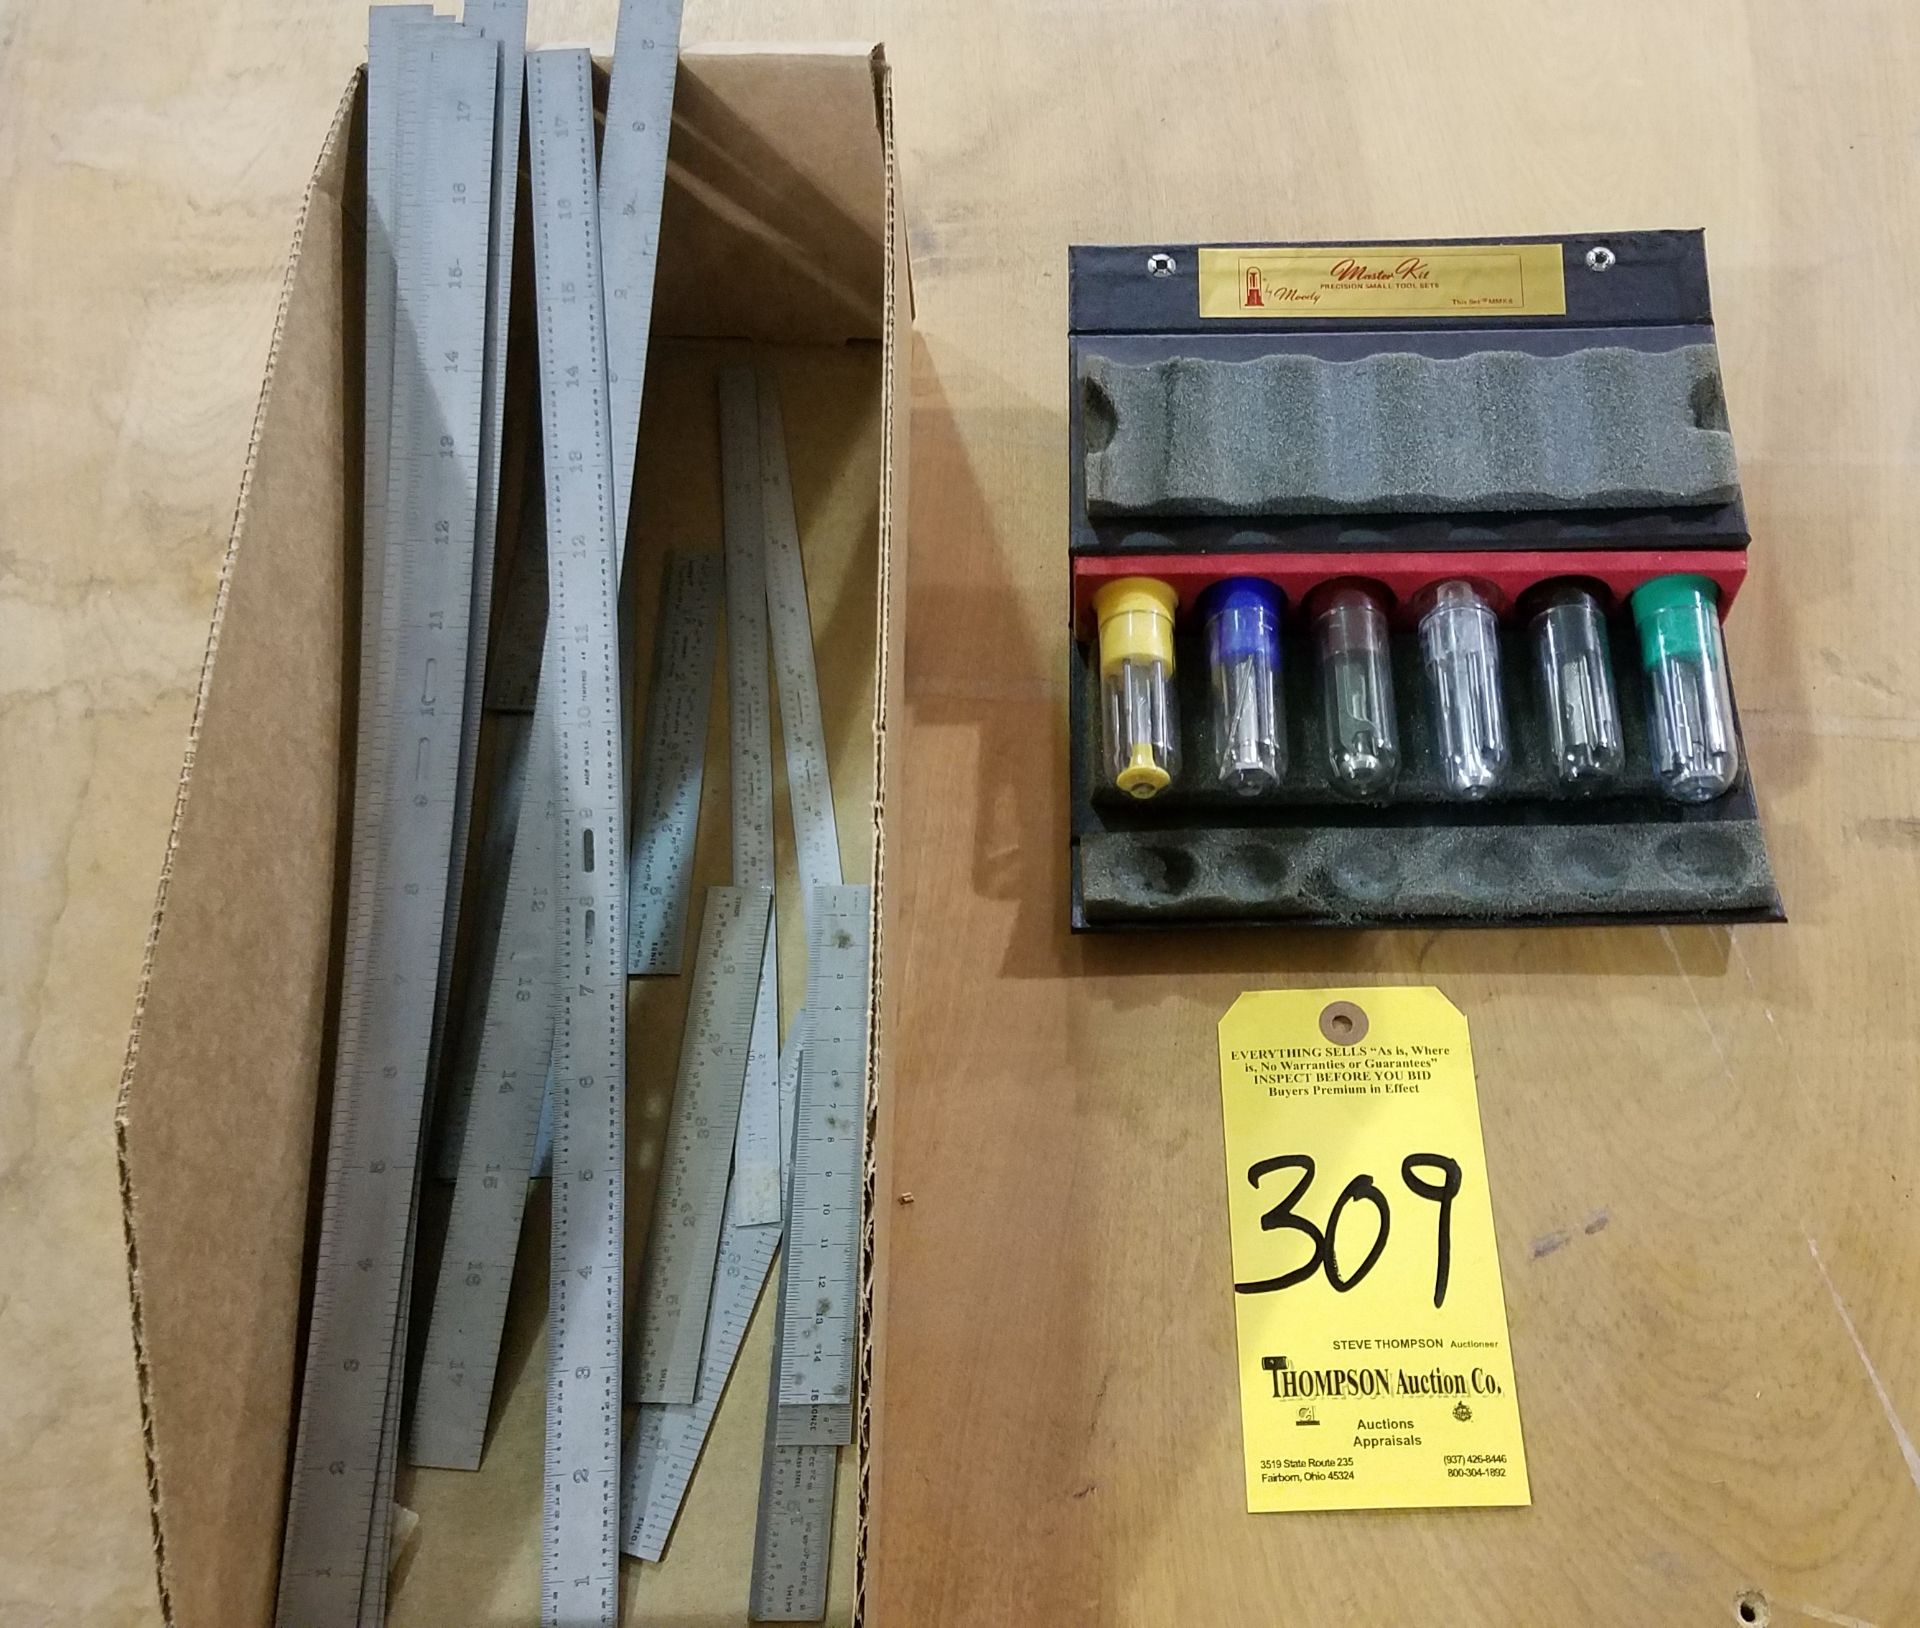 Screw Driver Set and Miscellaneous Scales